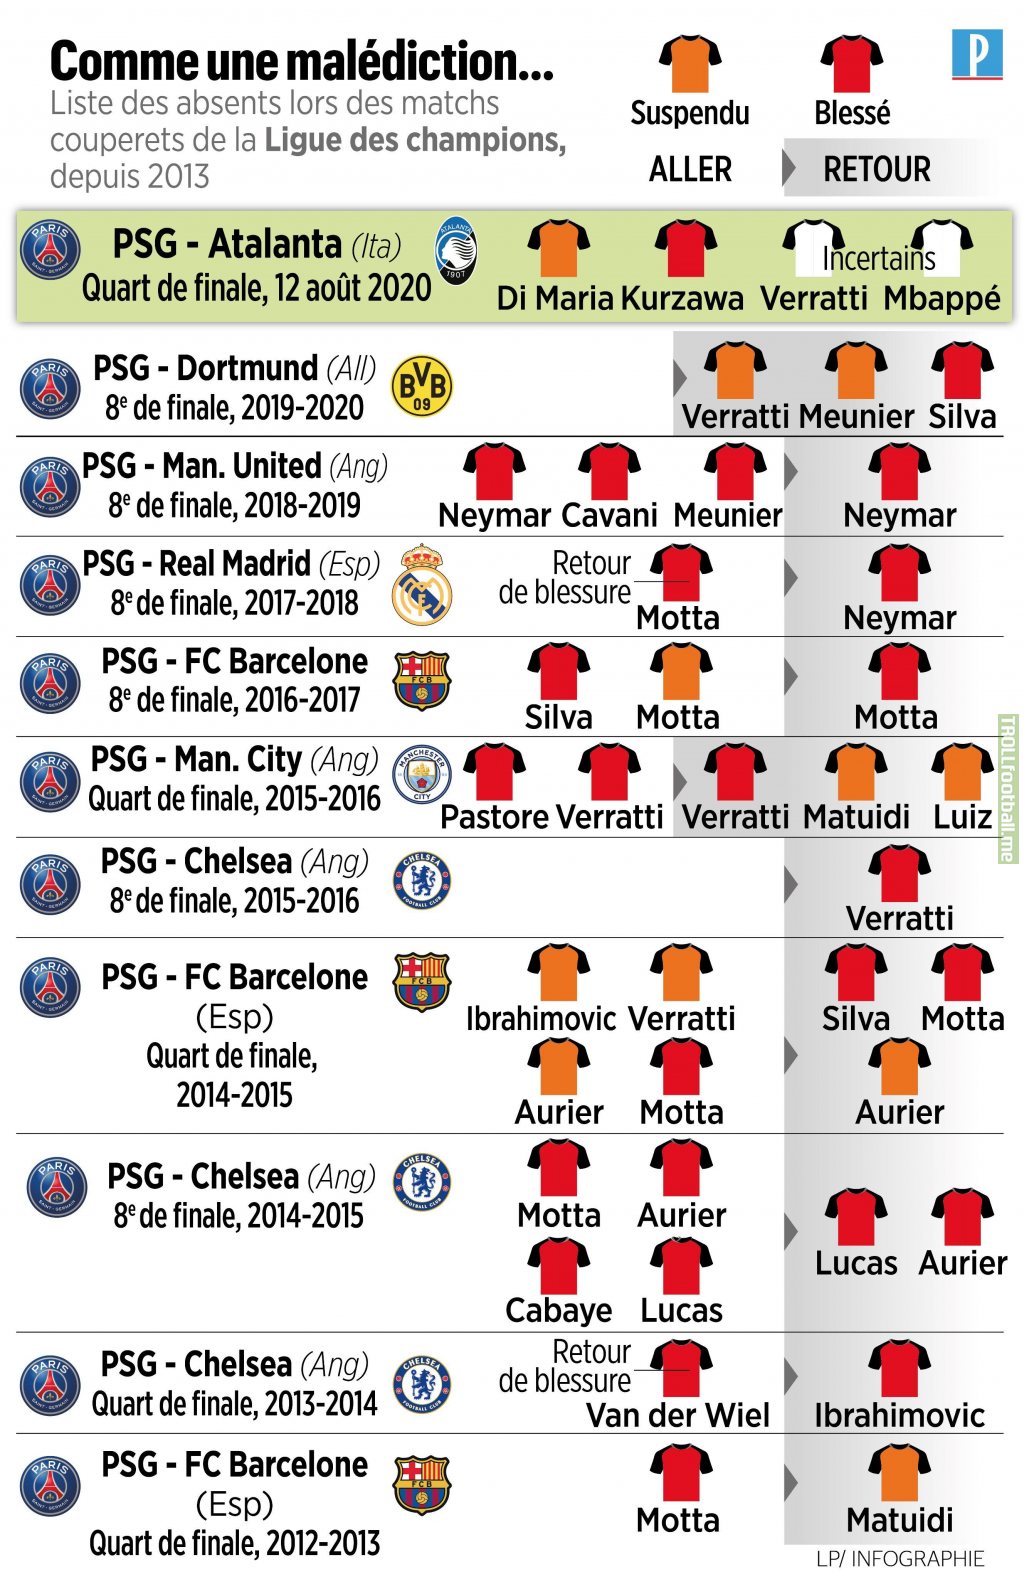 [Infographic] list of injured/suspended PSG players in UCL knockouts since 2012/13